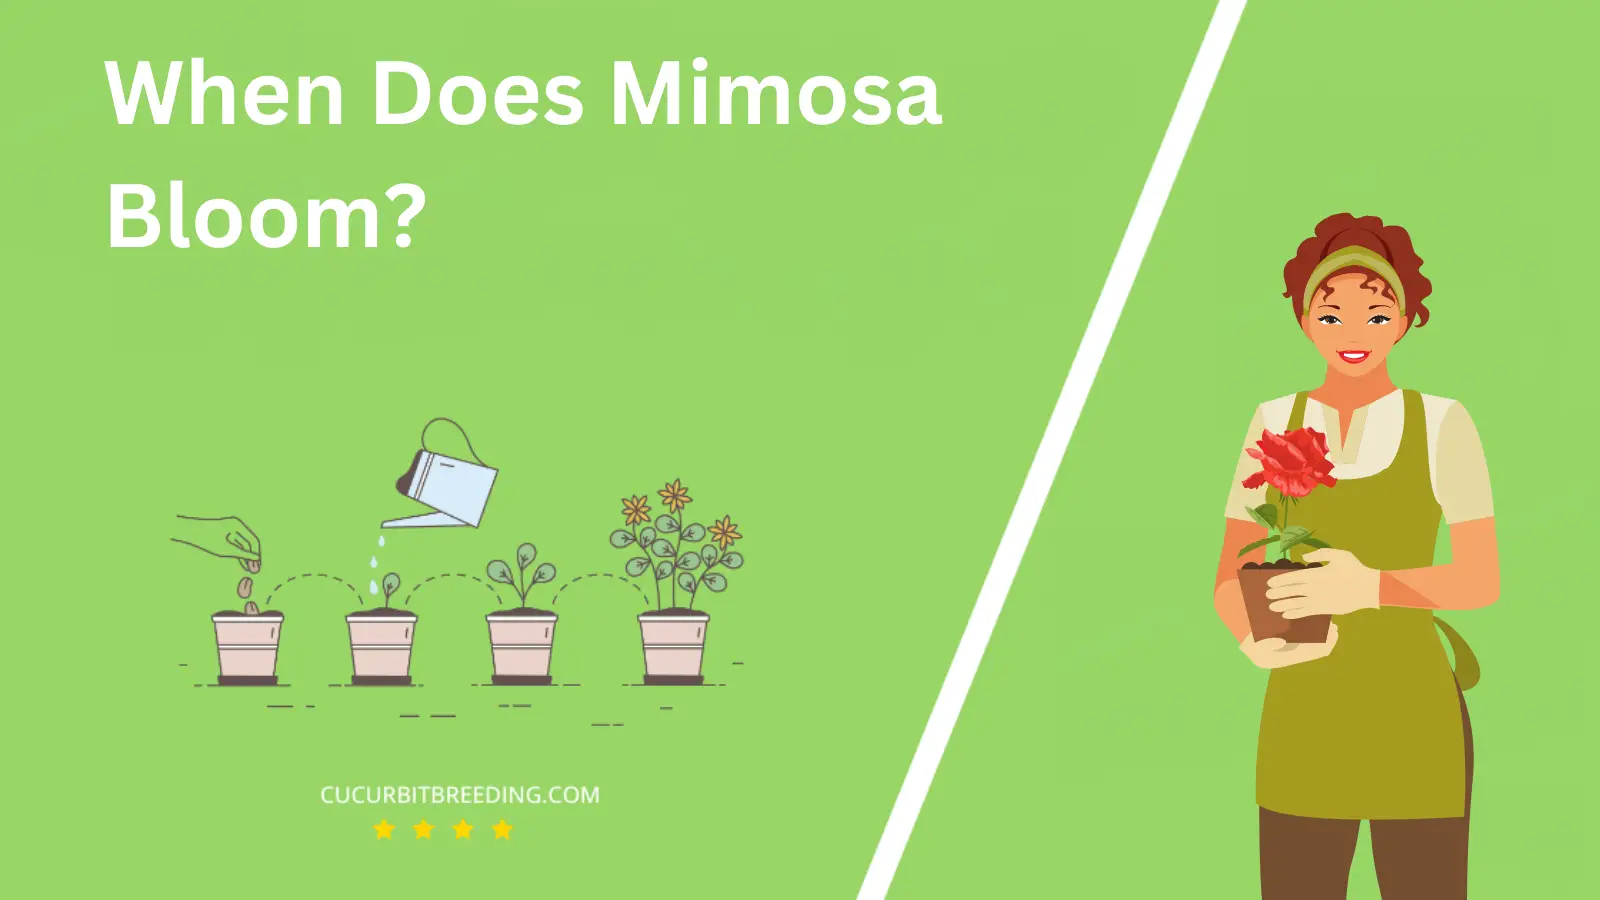 When Does Mimosa Bloom?